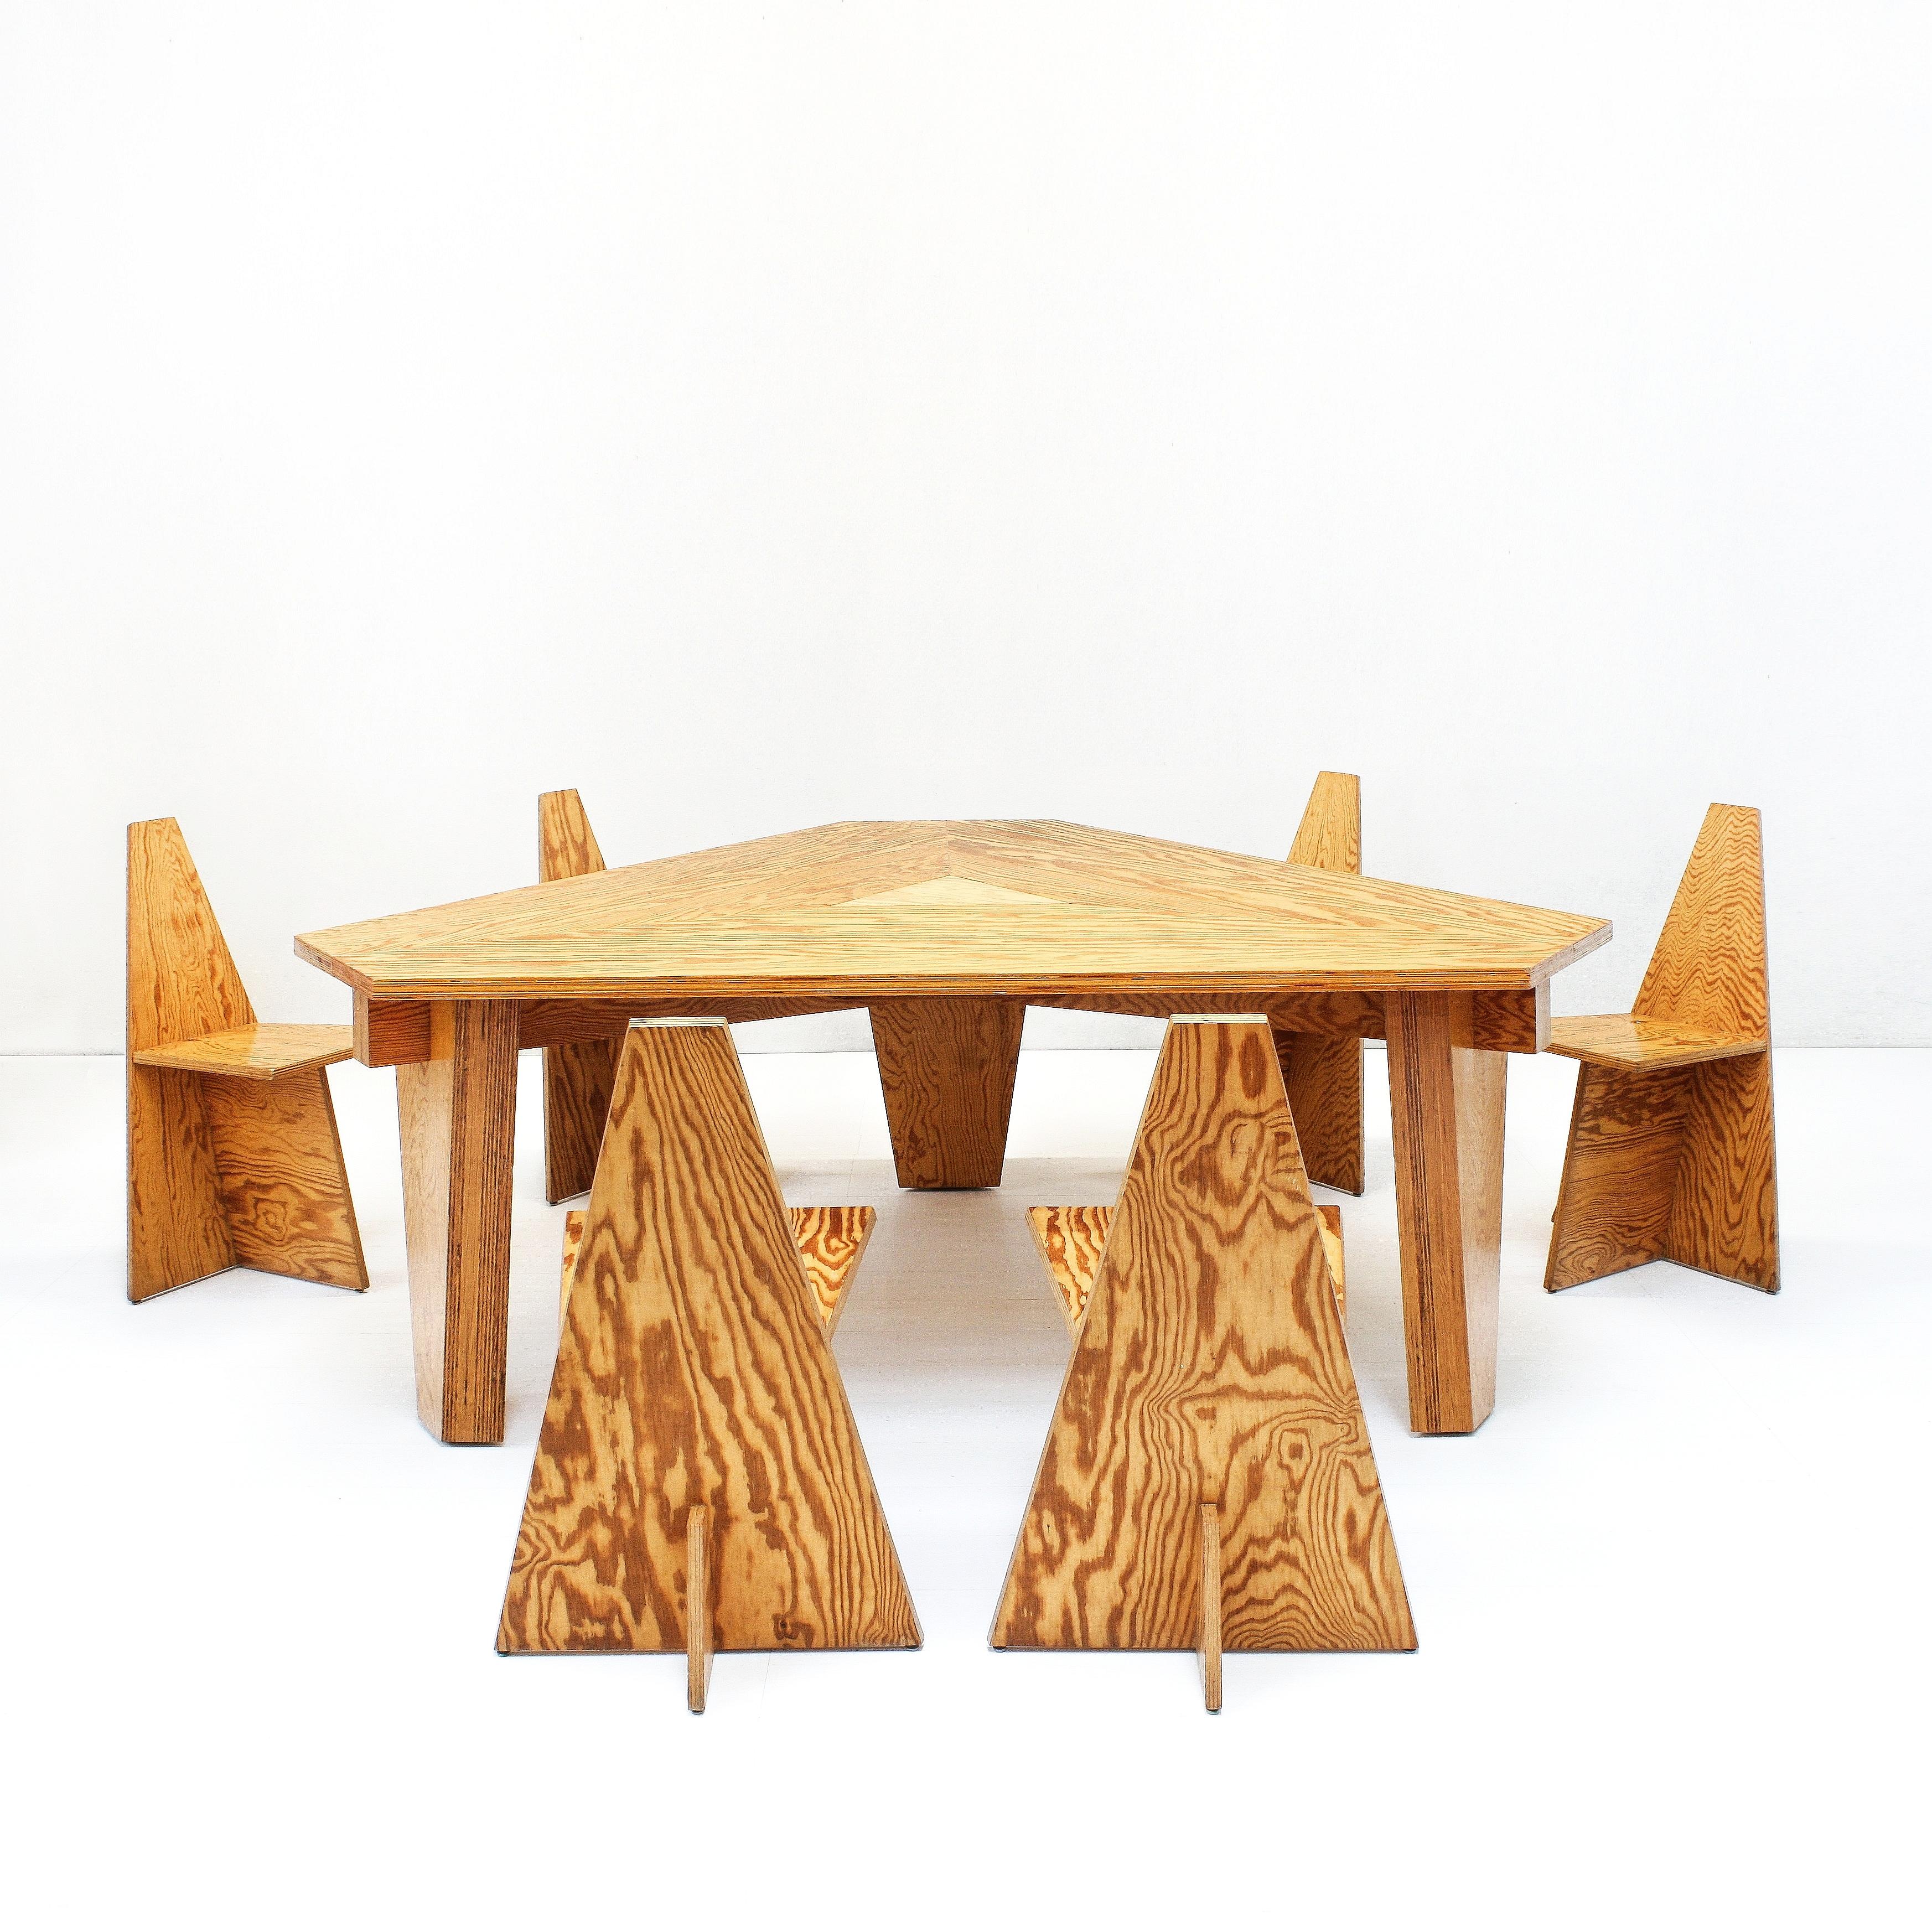 This triangular shaped dining set in oregon pine with amazing grain was created by Belgian architect Frank Verplanken for his own modernist dome shaped house in Destelbergen built in 1991.

Frank Verplanken was taught by the famous Juliaan Lampens